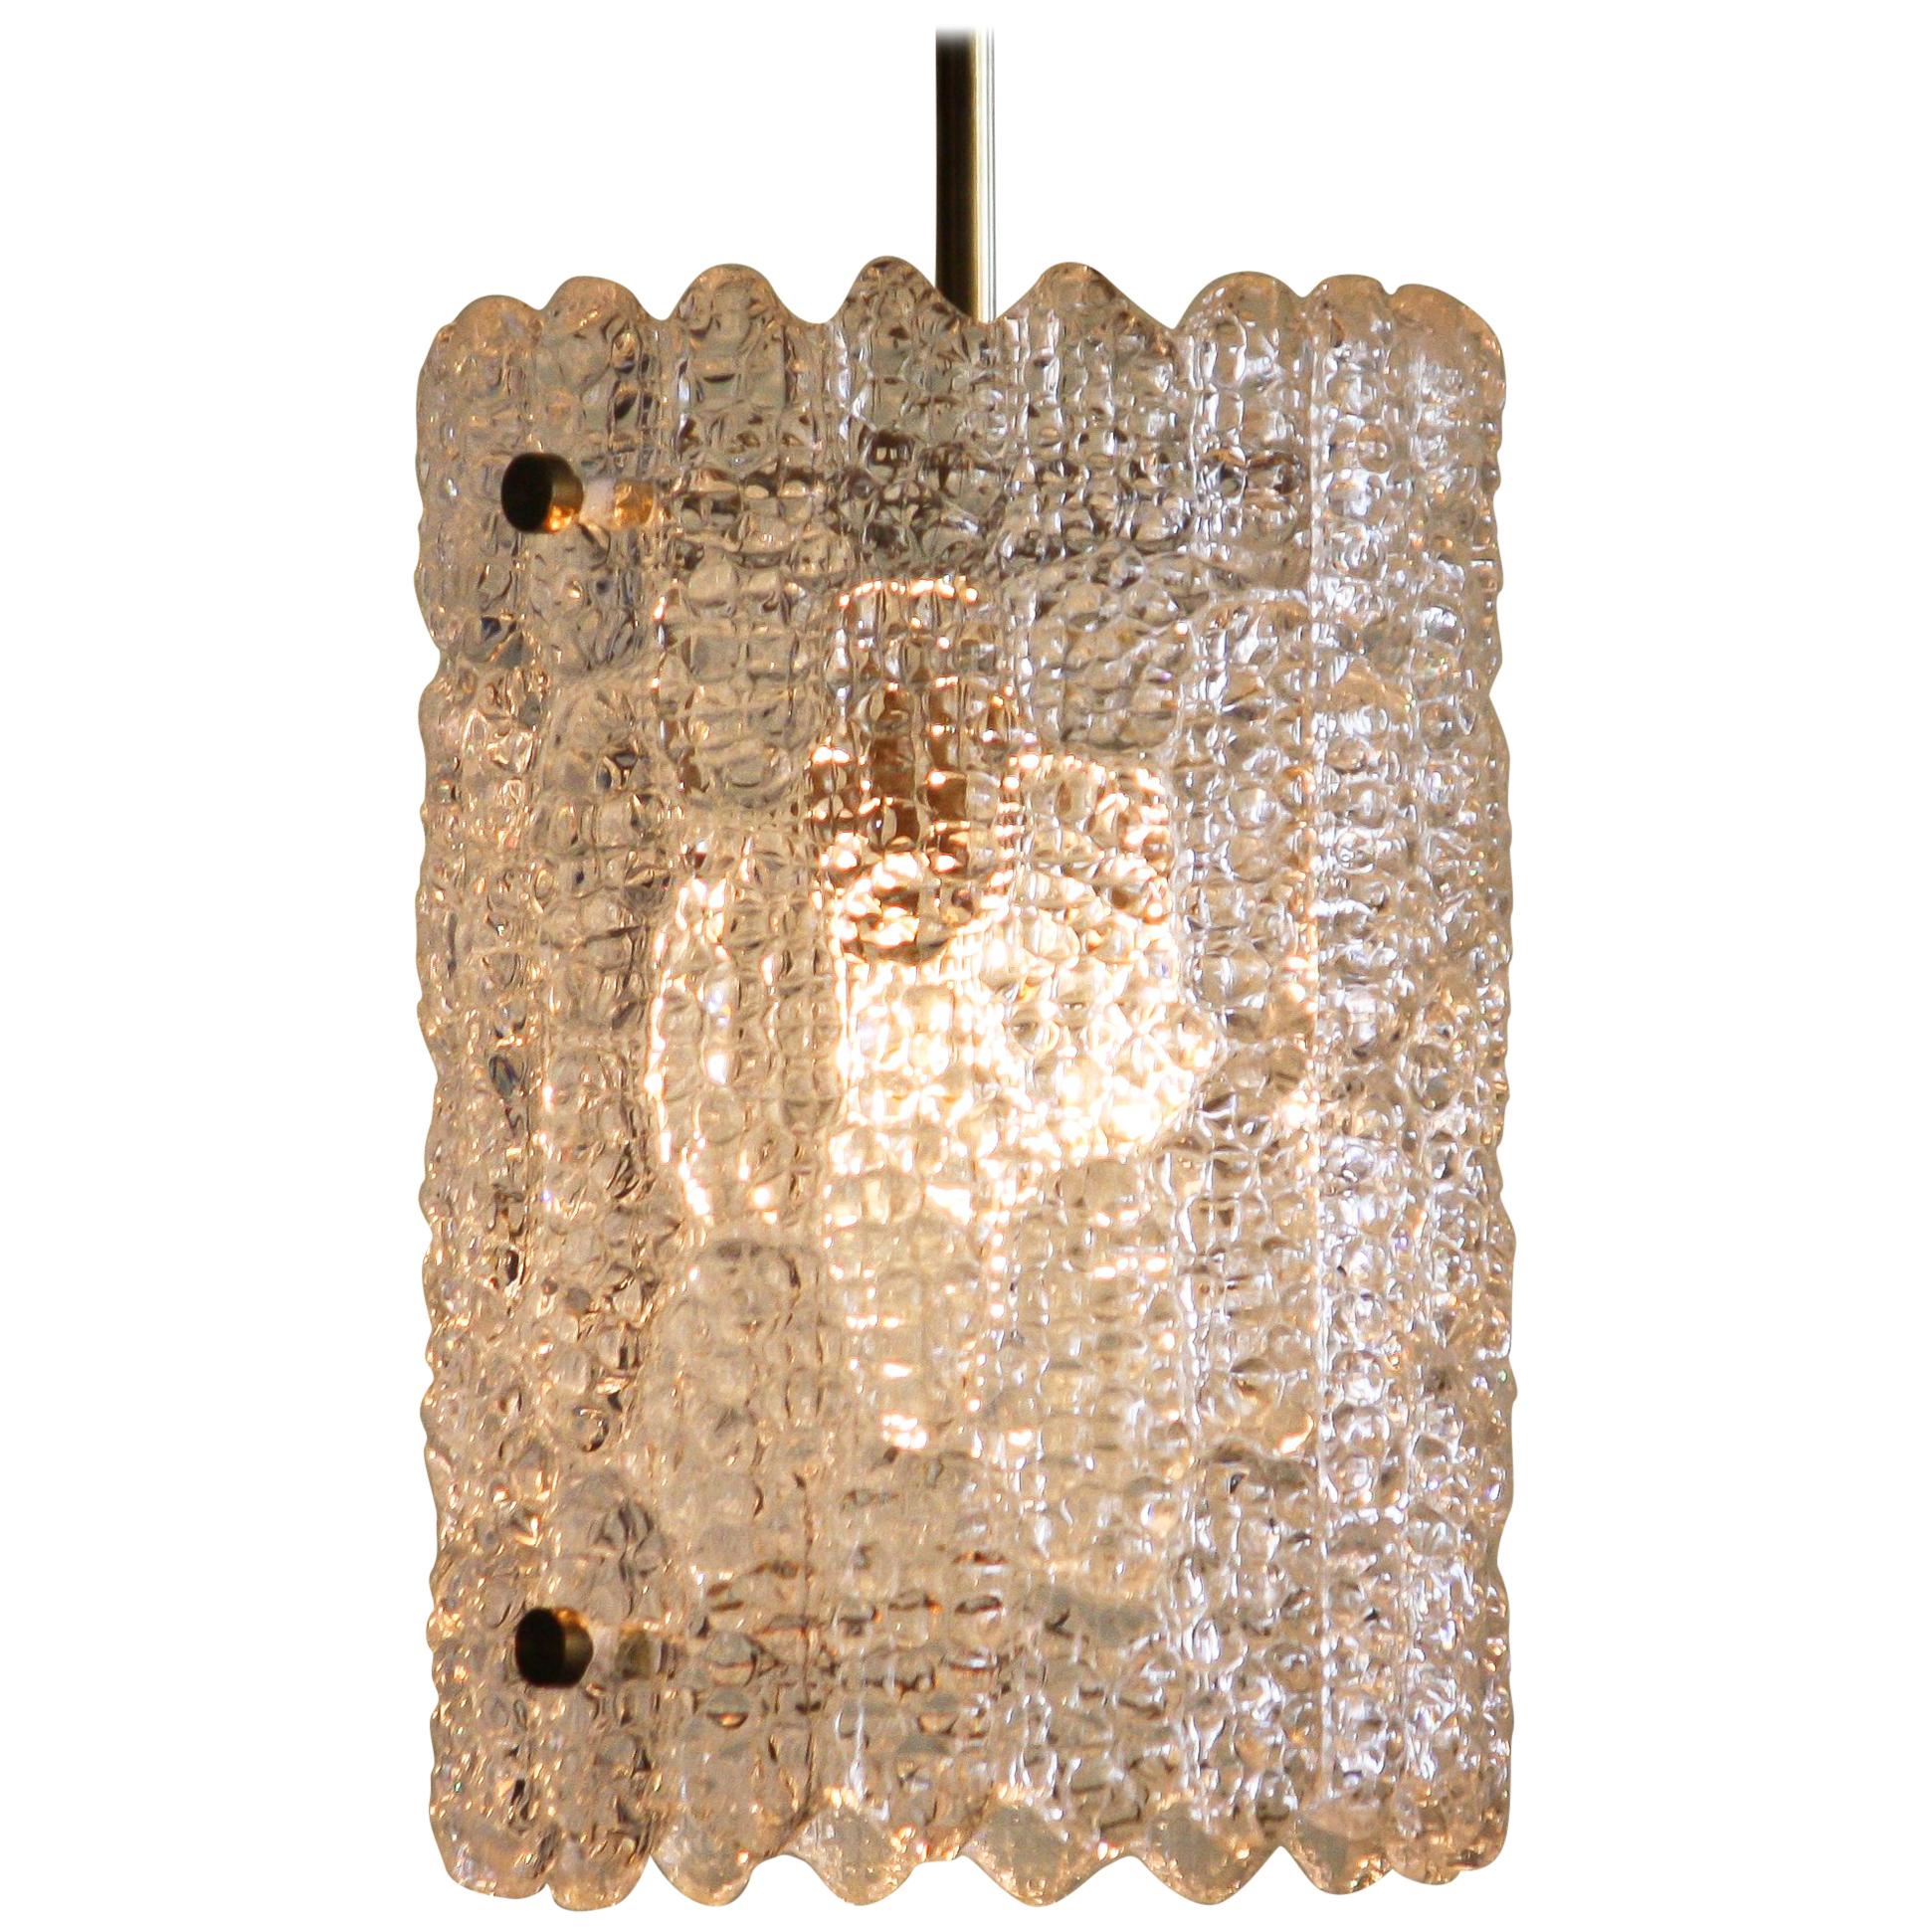 1960s, Brass and Crystal Glass Pendant by Carl Fagerlund for Orrefors